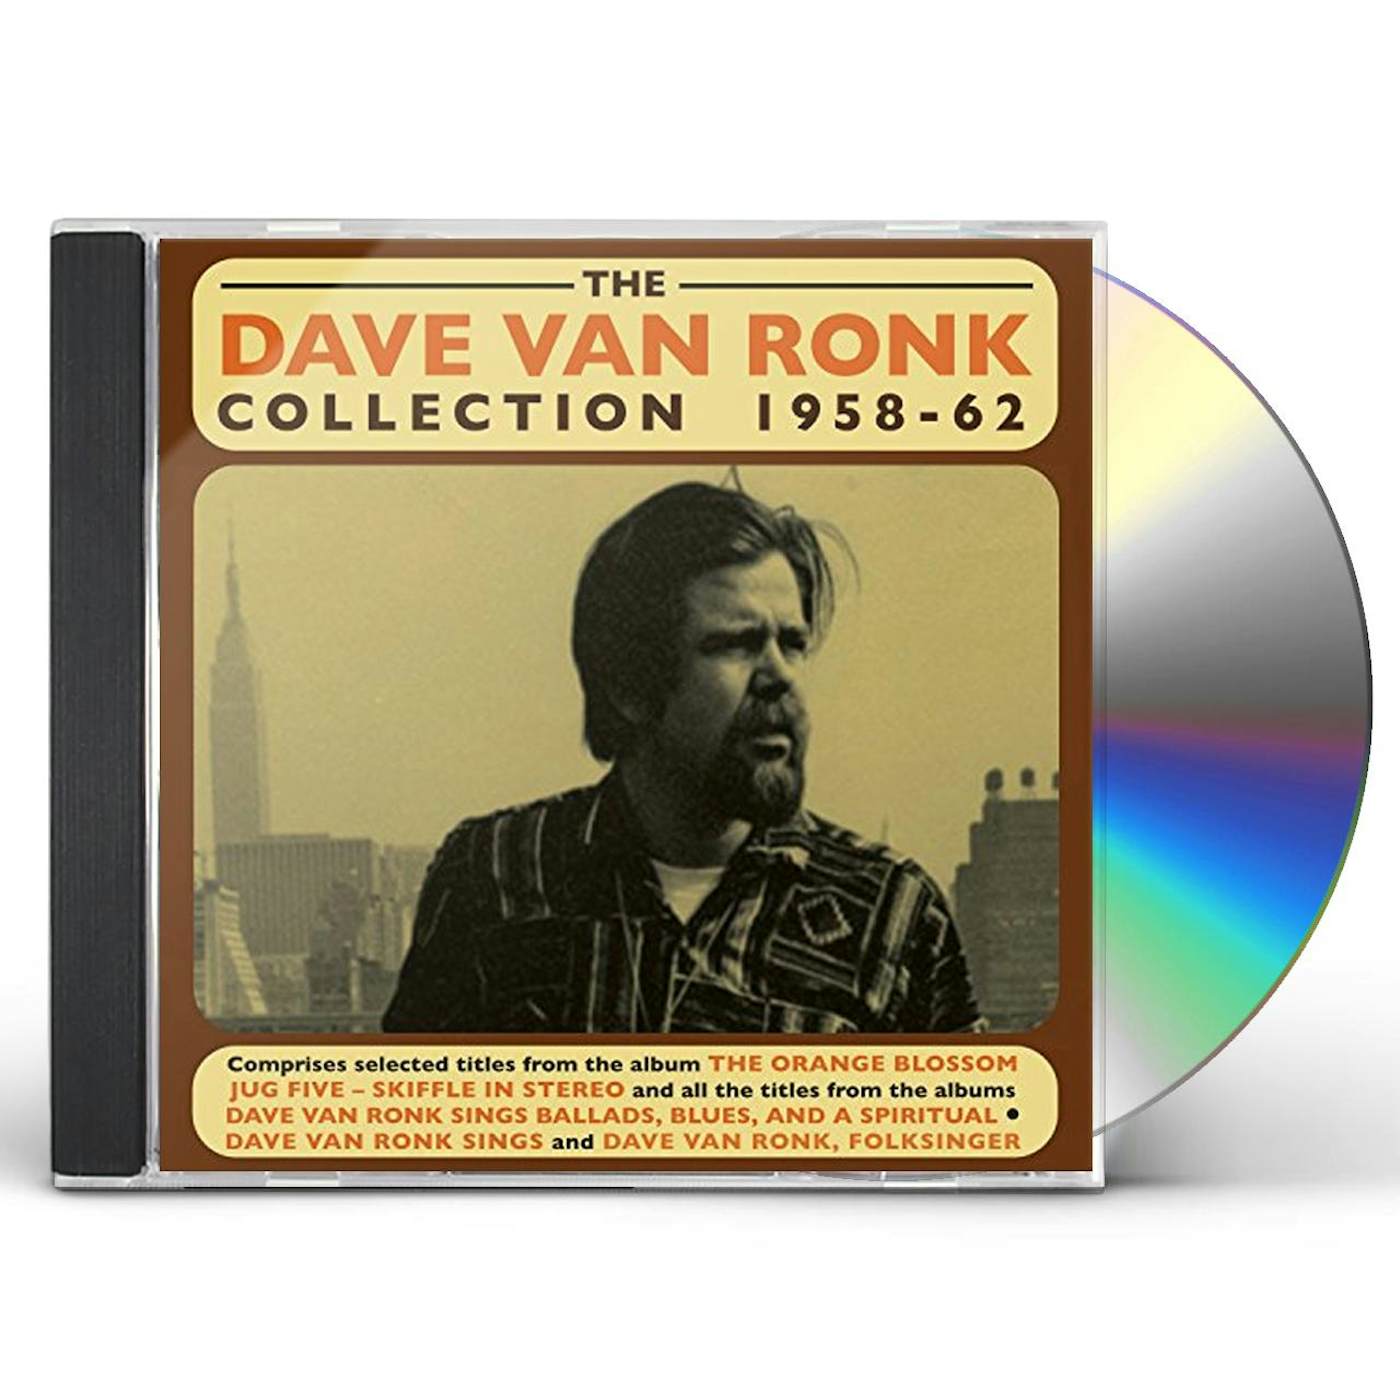 DAVE VAN RONK COLLECTION 1958-62 CD